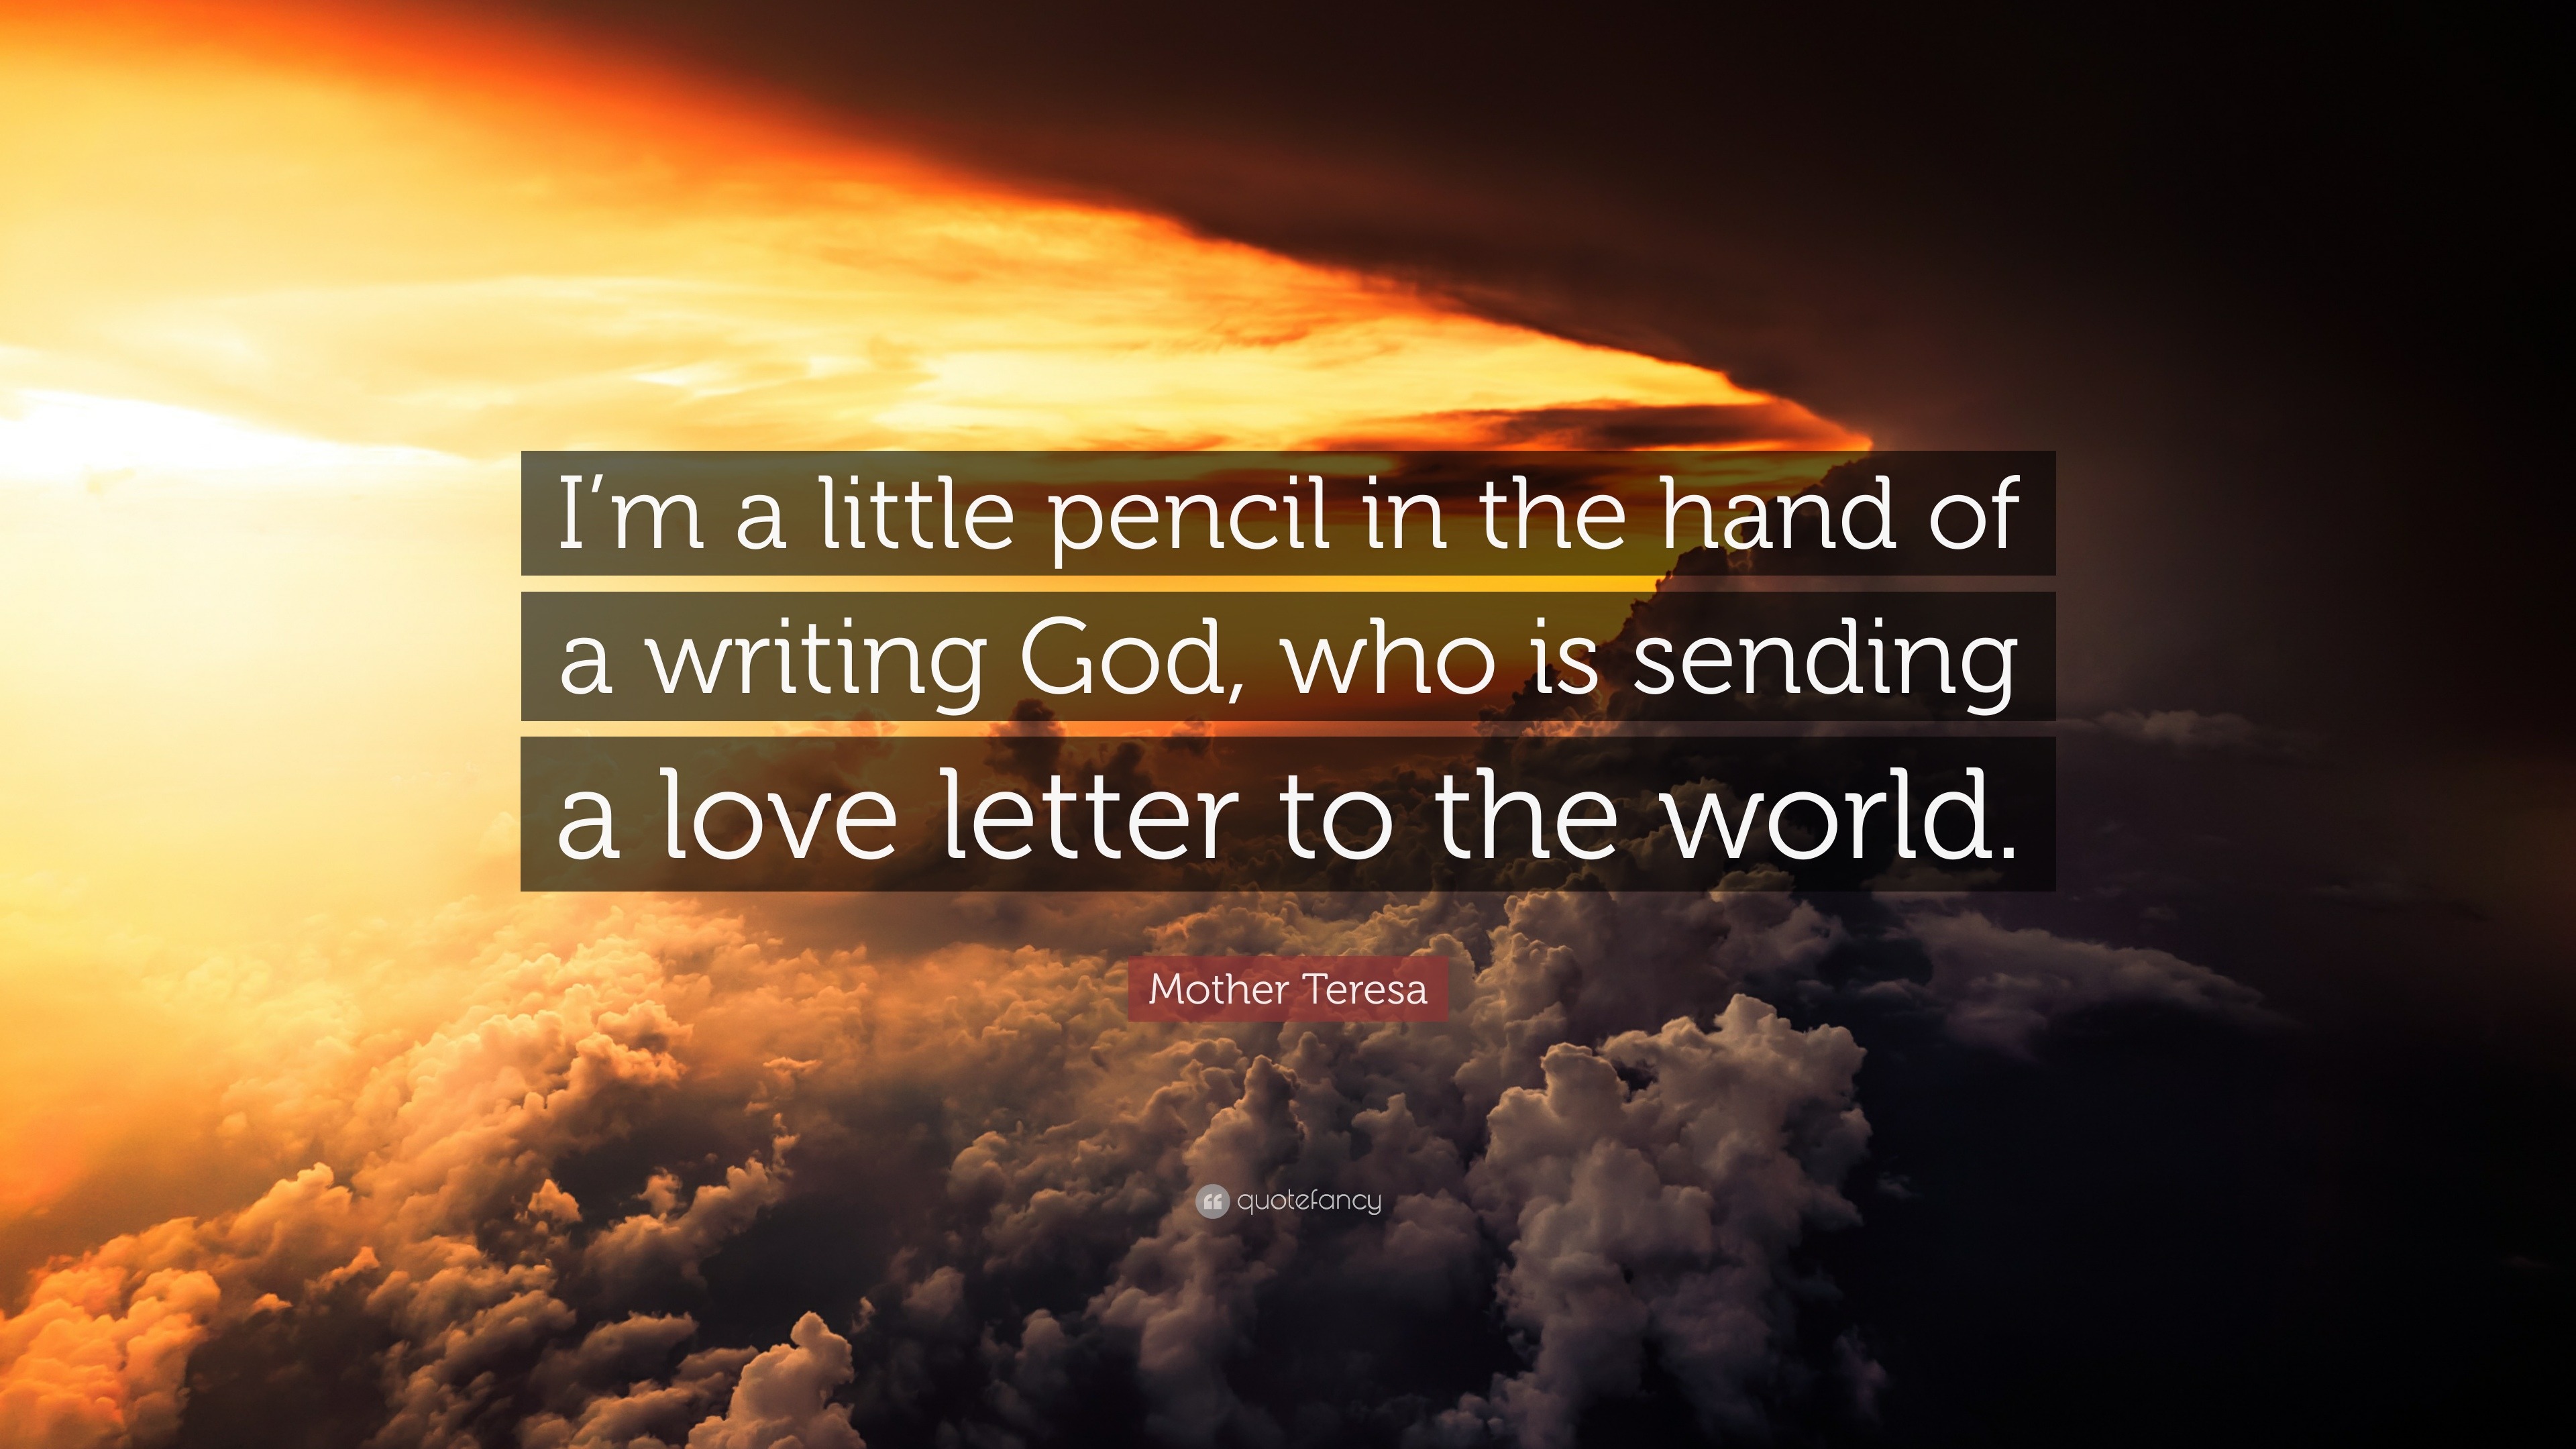 Mother Teresa Quote: “I’m a little pencil in the hand of a writing God